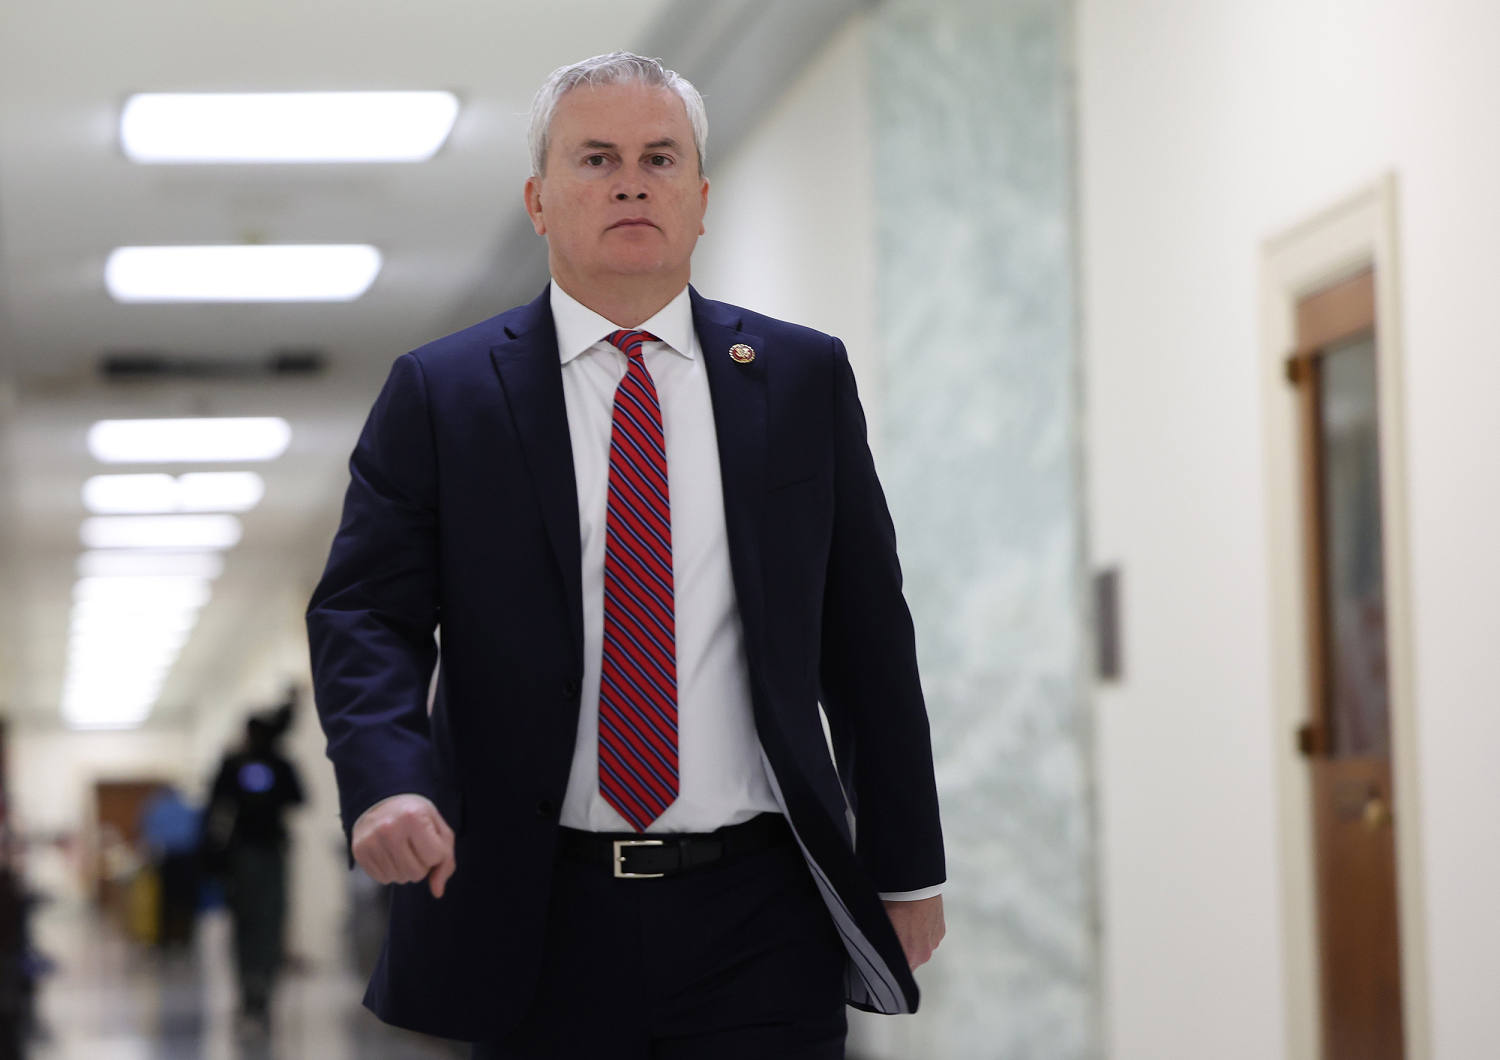 GOP’s James Comer haunted by his earlier ‘shell company’ rhetoric